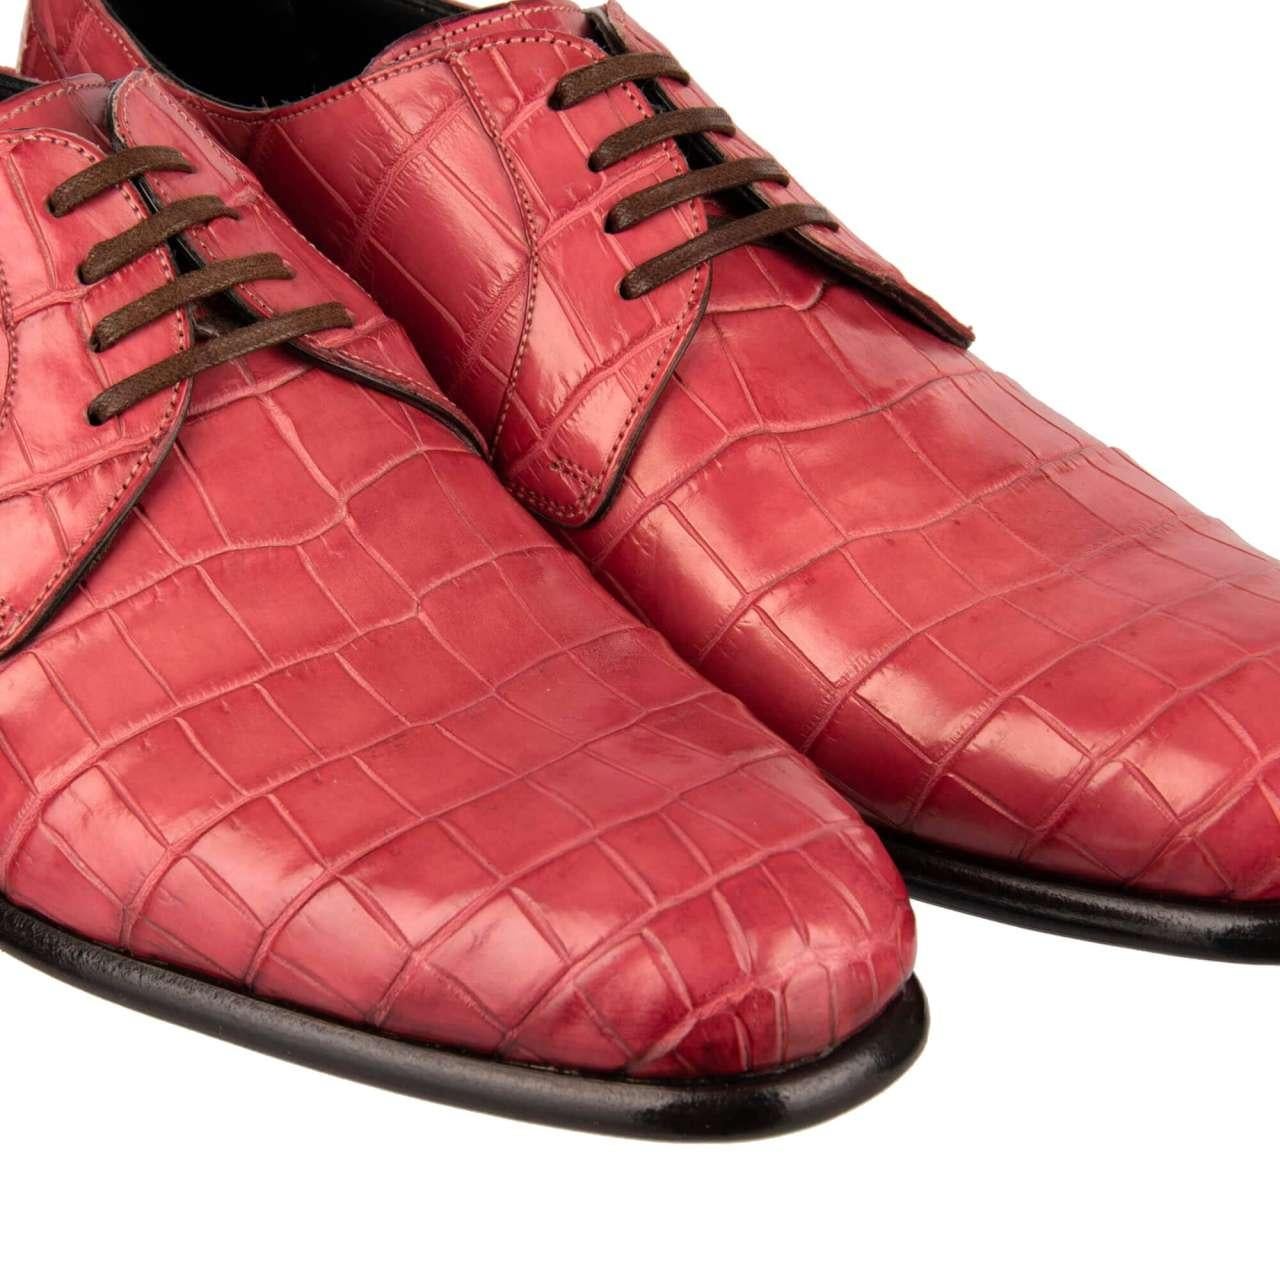 Dolce & Gabbana Crocodile Leather Derby Shoes SIENA Pink EUR 39 For Sale 1